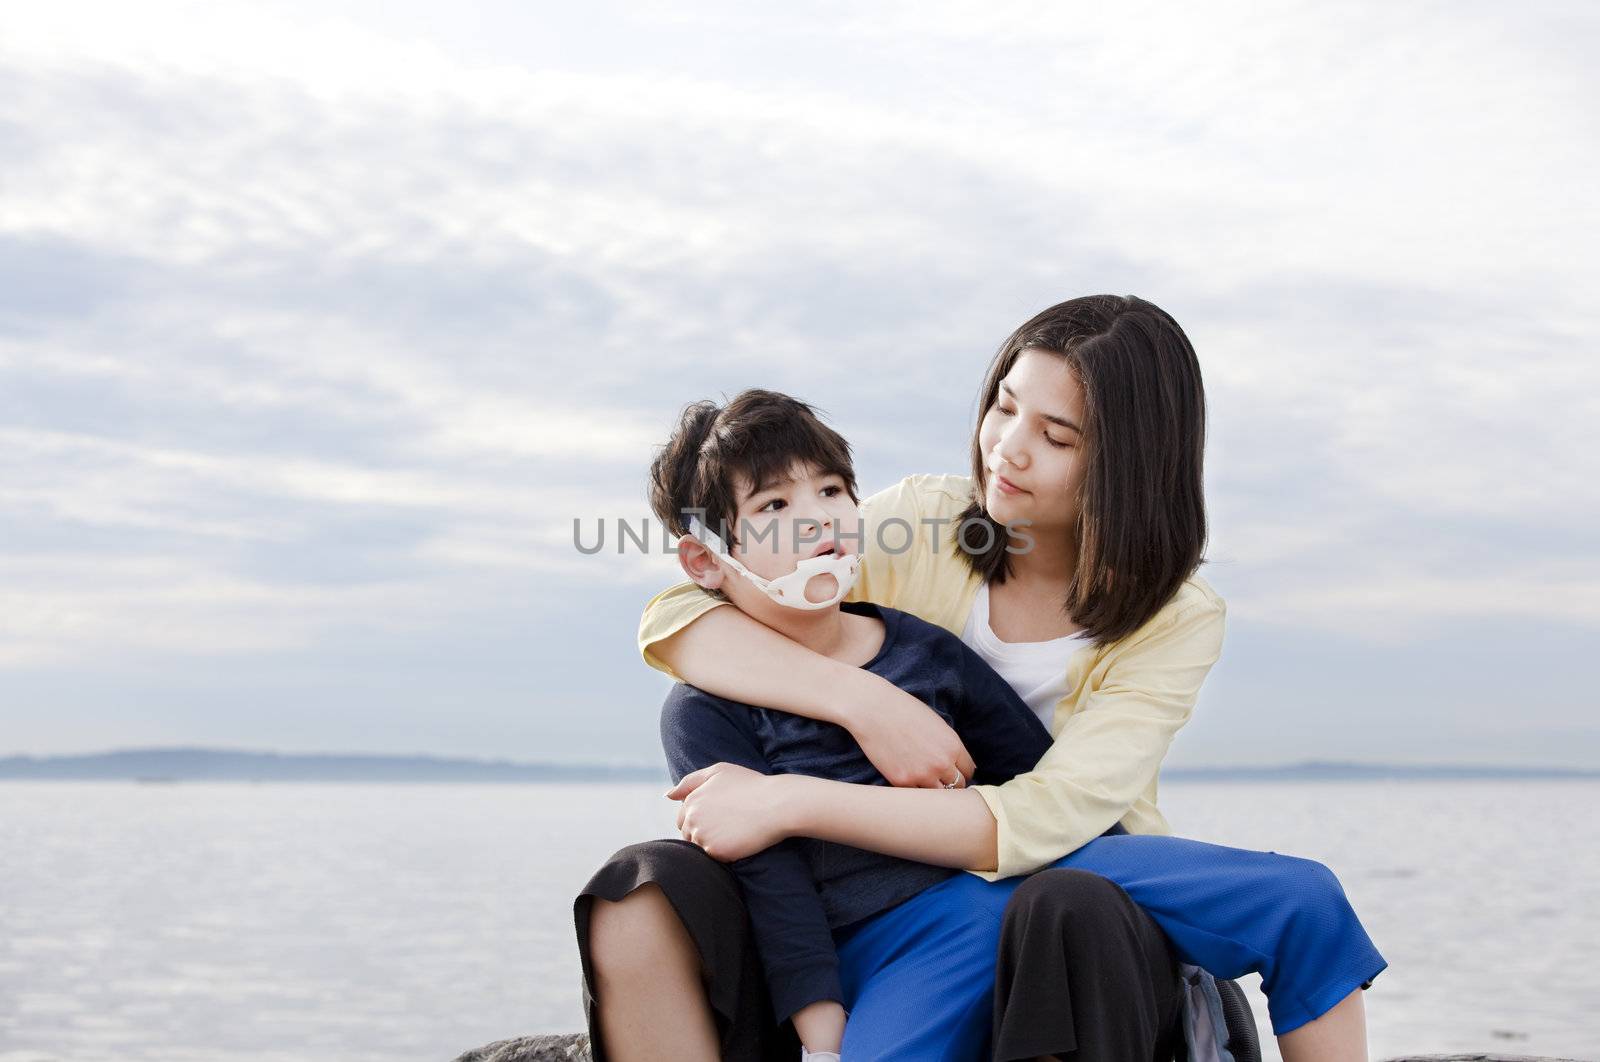 Teenage sister holding her disabled brother on the beach by jarenwicklund